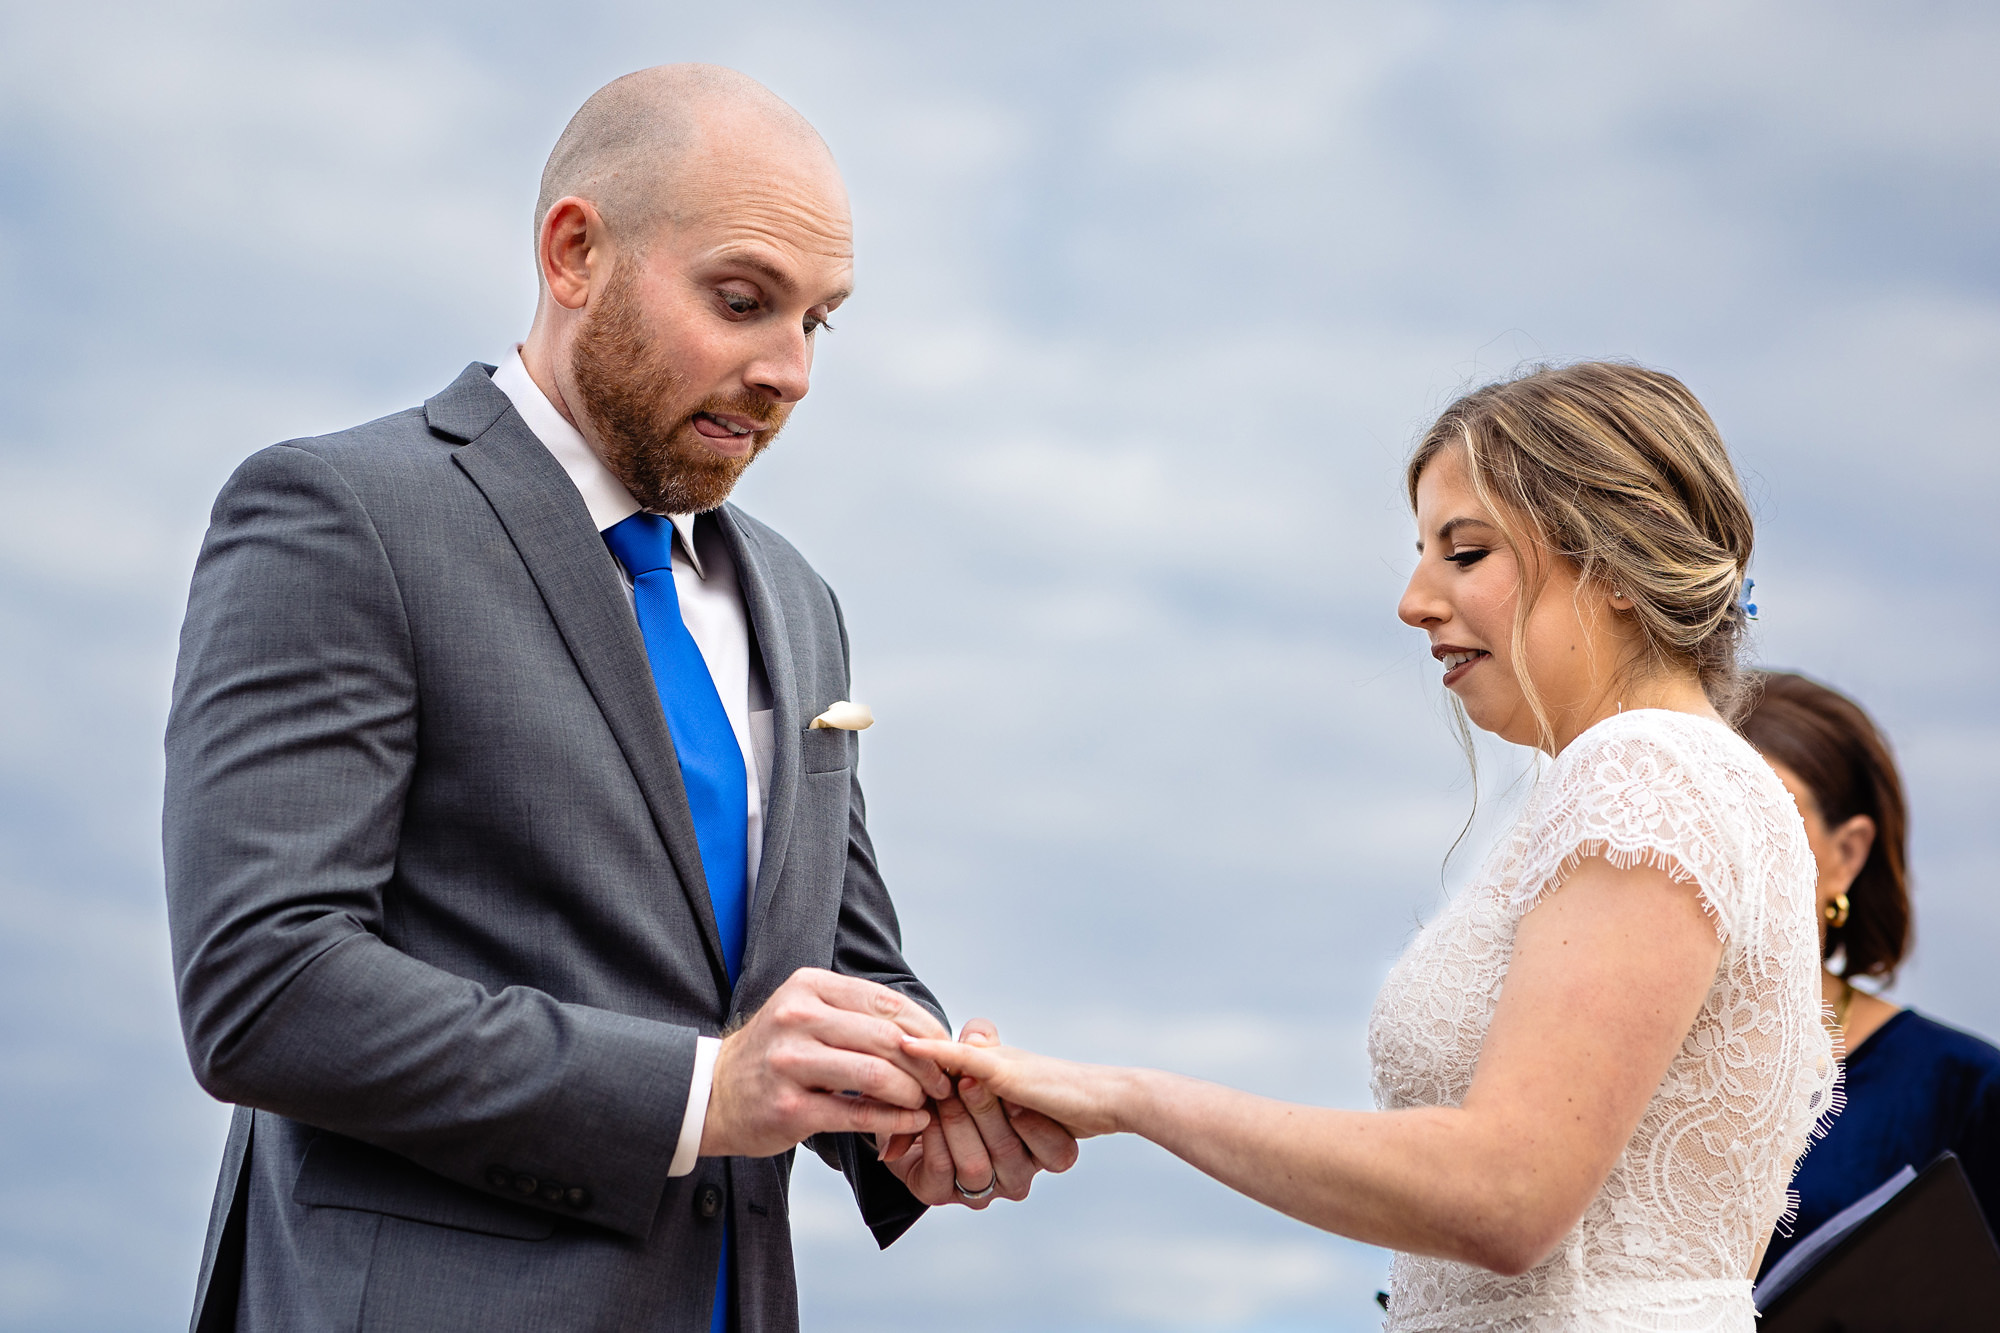 A groom struggles with sliding the ring on the bride's finger during their elopement ceremony.